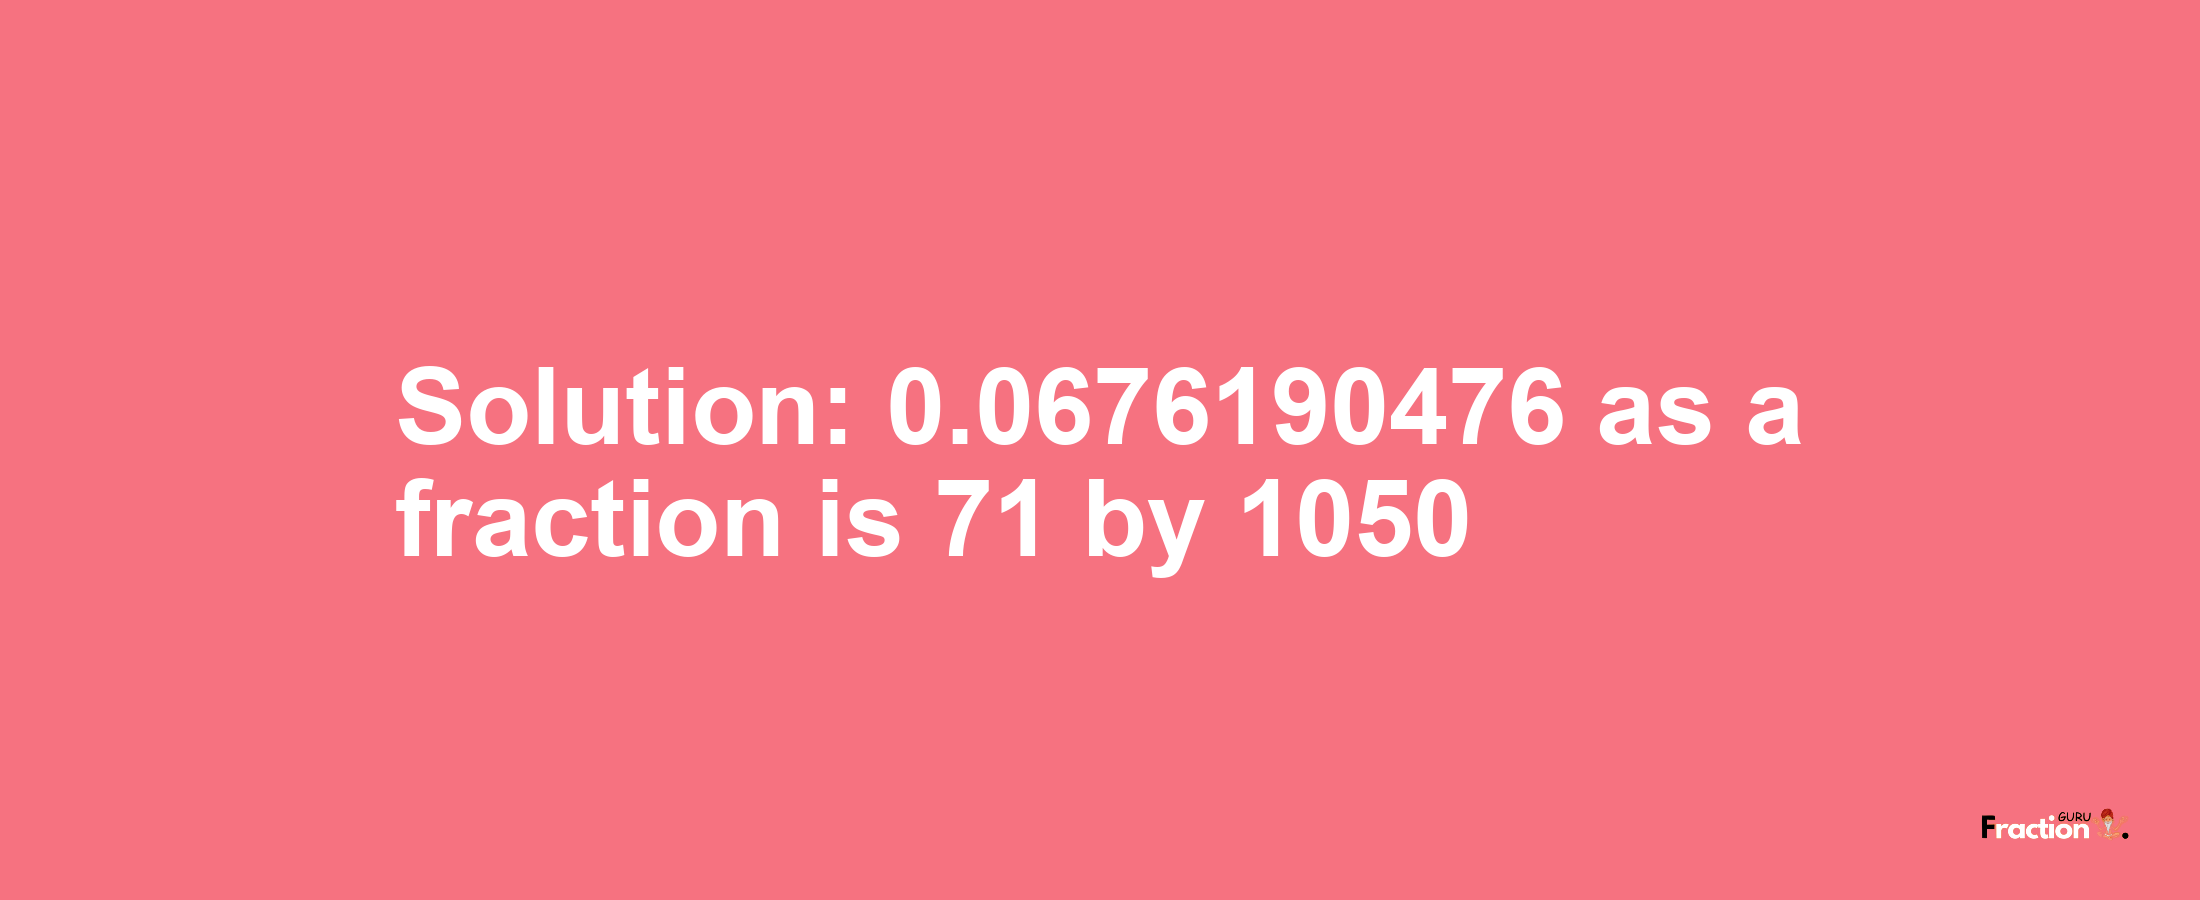 Solution:0.0676190476 as a fraction is 71/1050